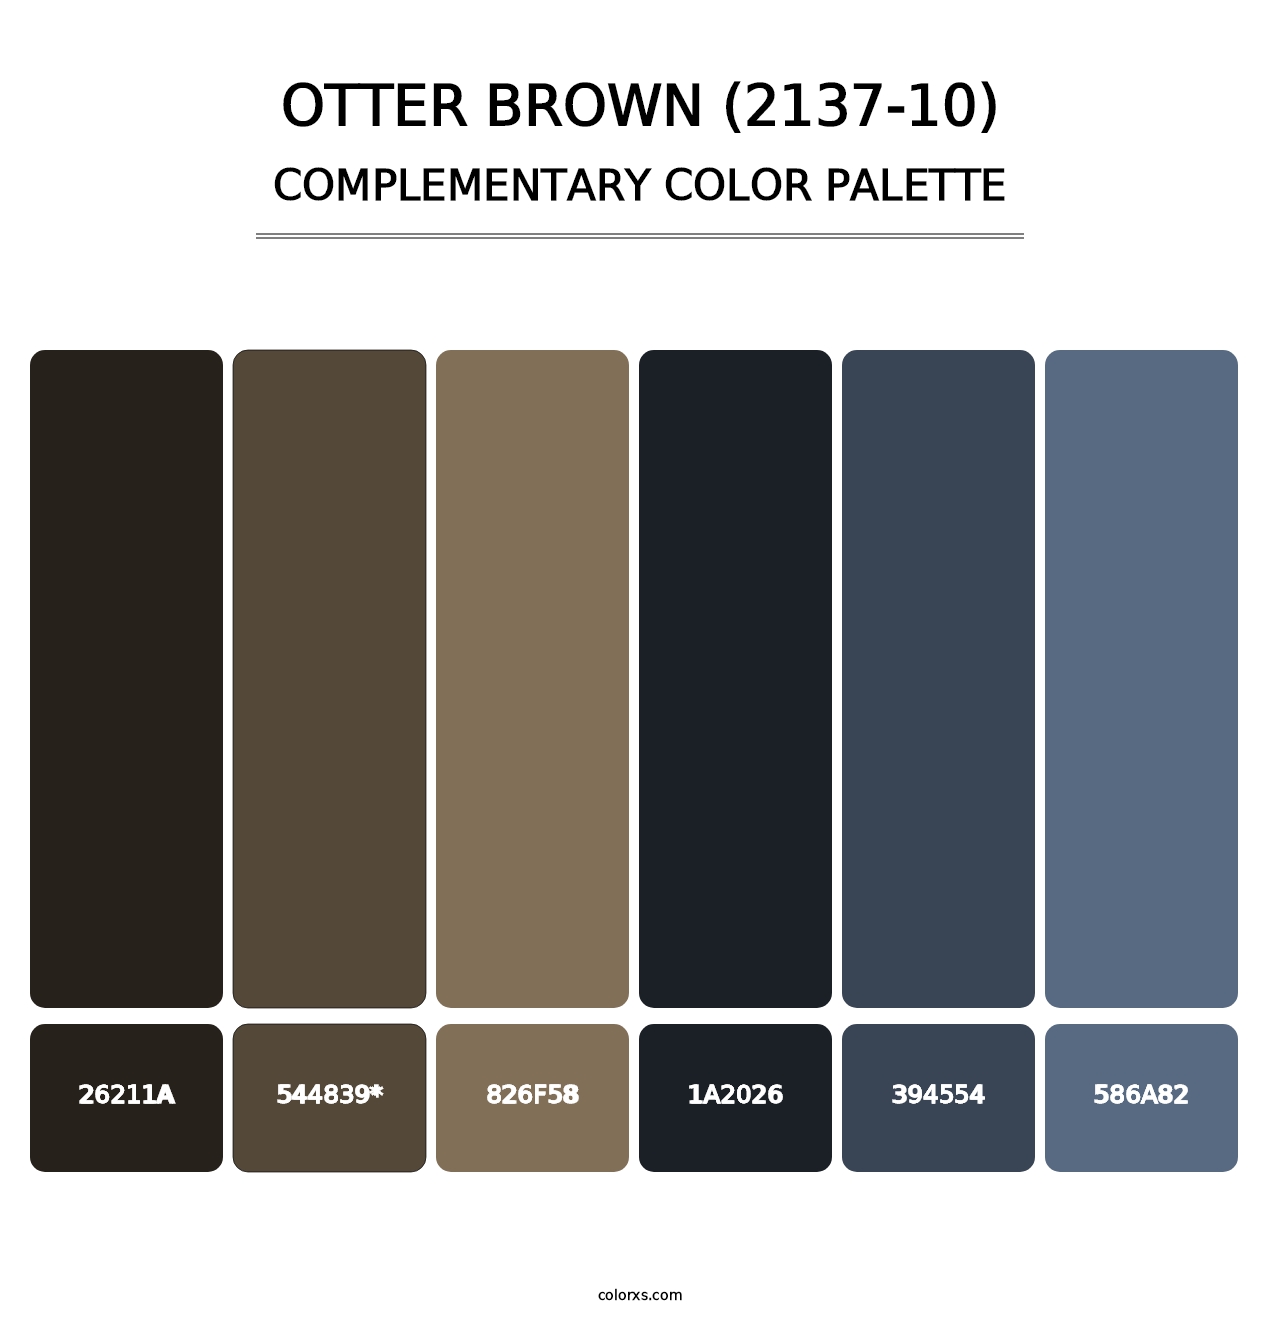 Otter Brown (2137-10) - Complementary Color Palette